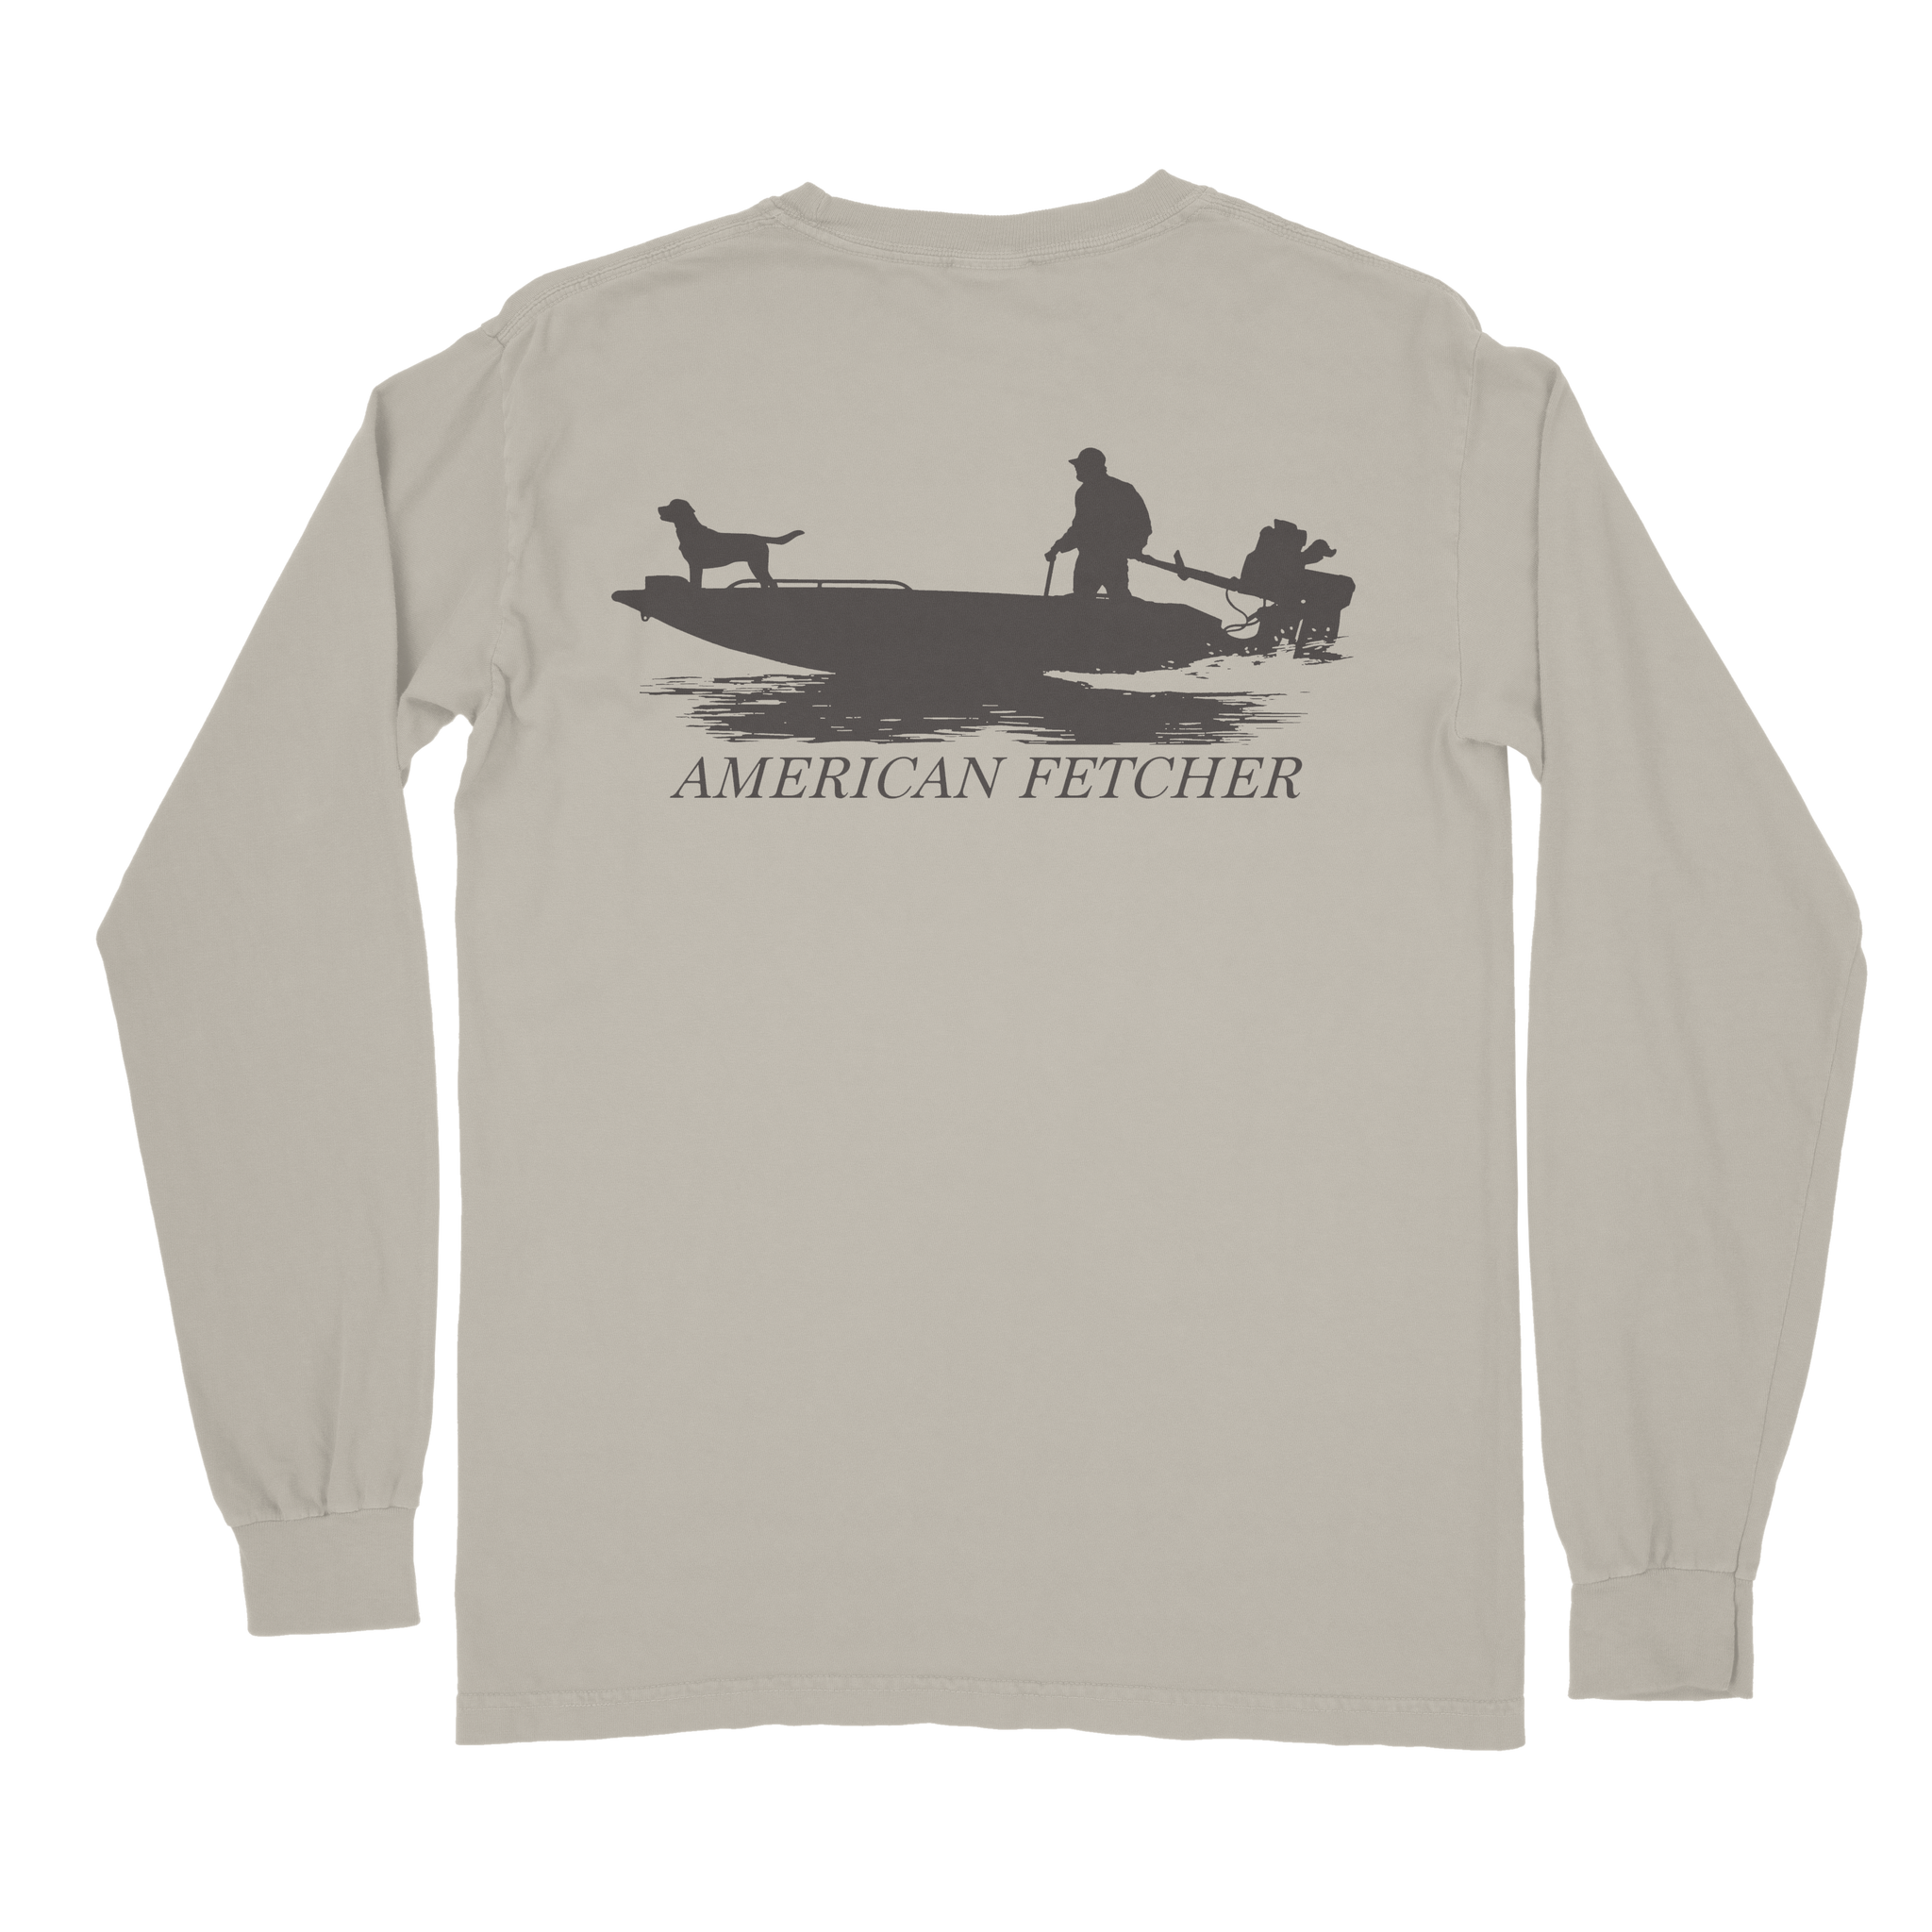 Brand em Outfitters, 'Master Baiter' Long Sleeve Fishing Shirt Unisex True  To Size Adult Men's XS - 6XL Available Now Check out the website below